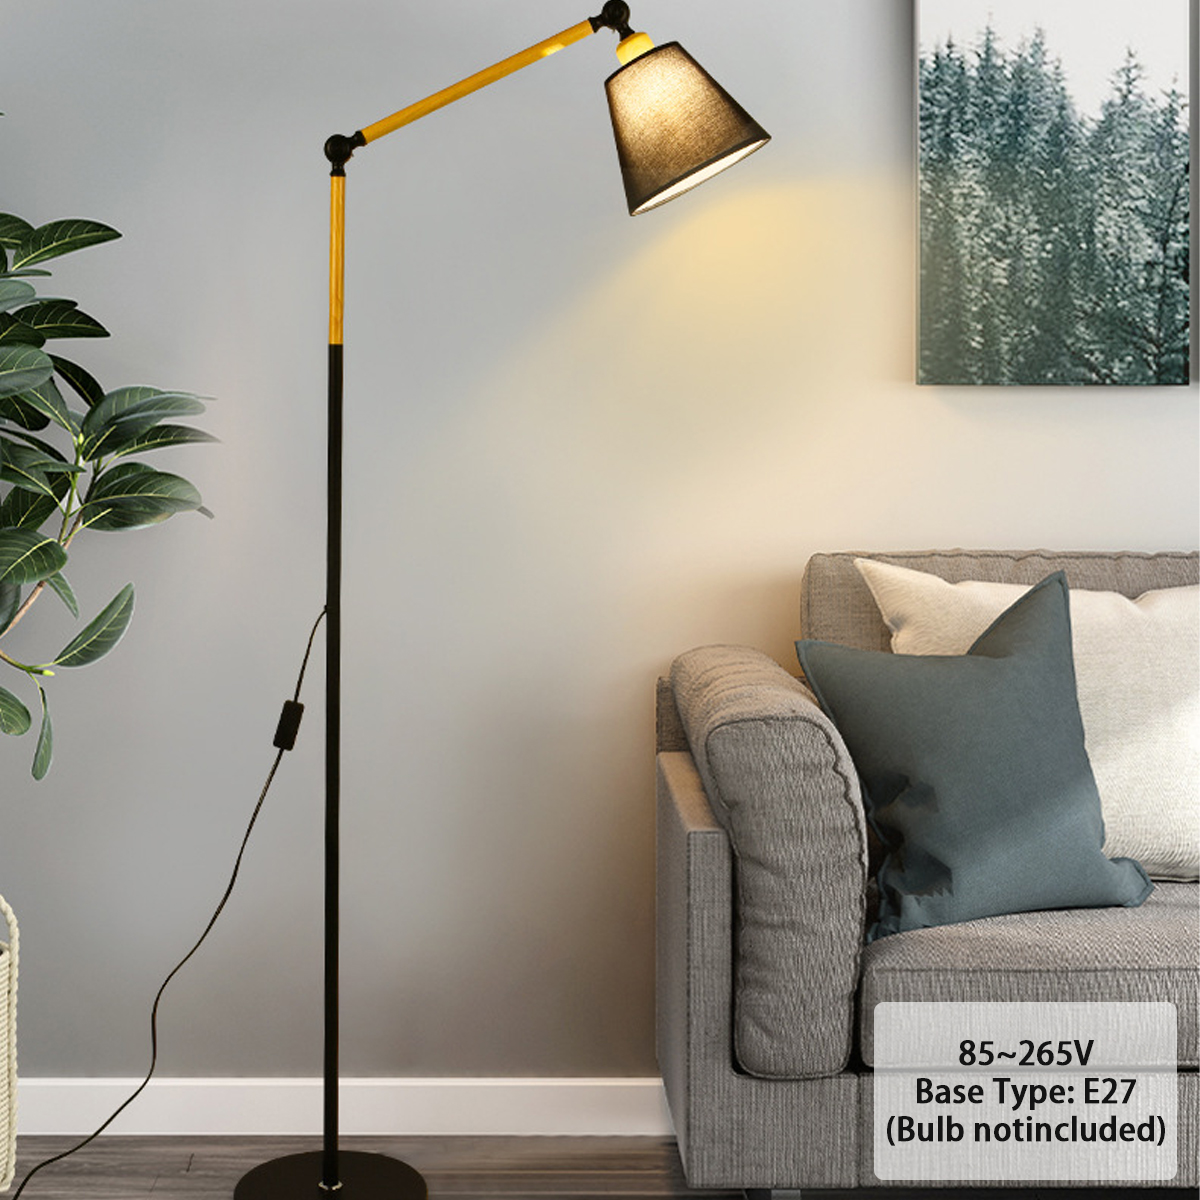 Find 85v 265V Modern Floor Lamp Wooden Iron Hanging Lamp For Shop Restaurant Bar Without Bulb for Sale on Gipsybee.com with cryptocurrencies